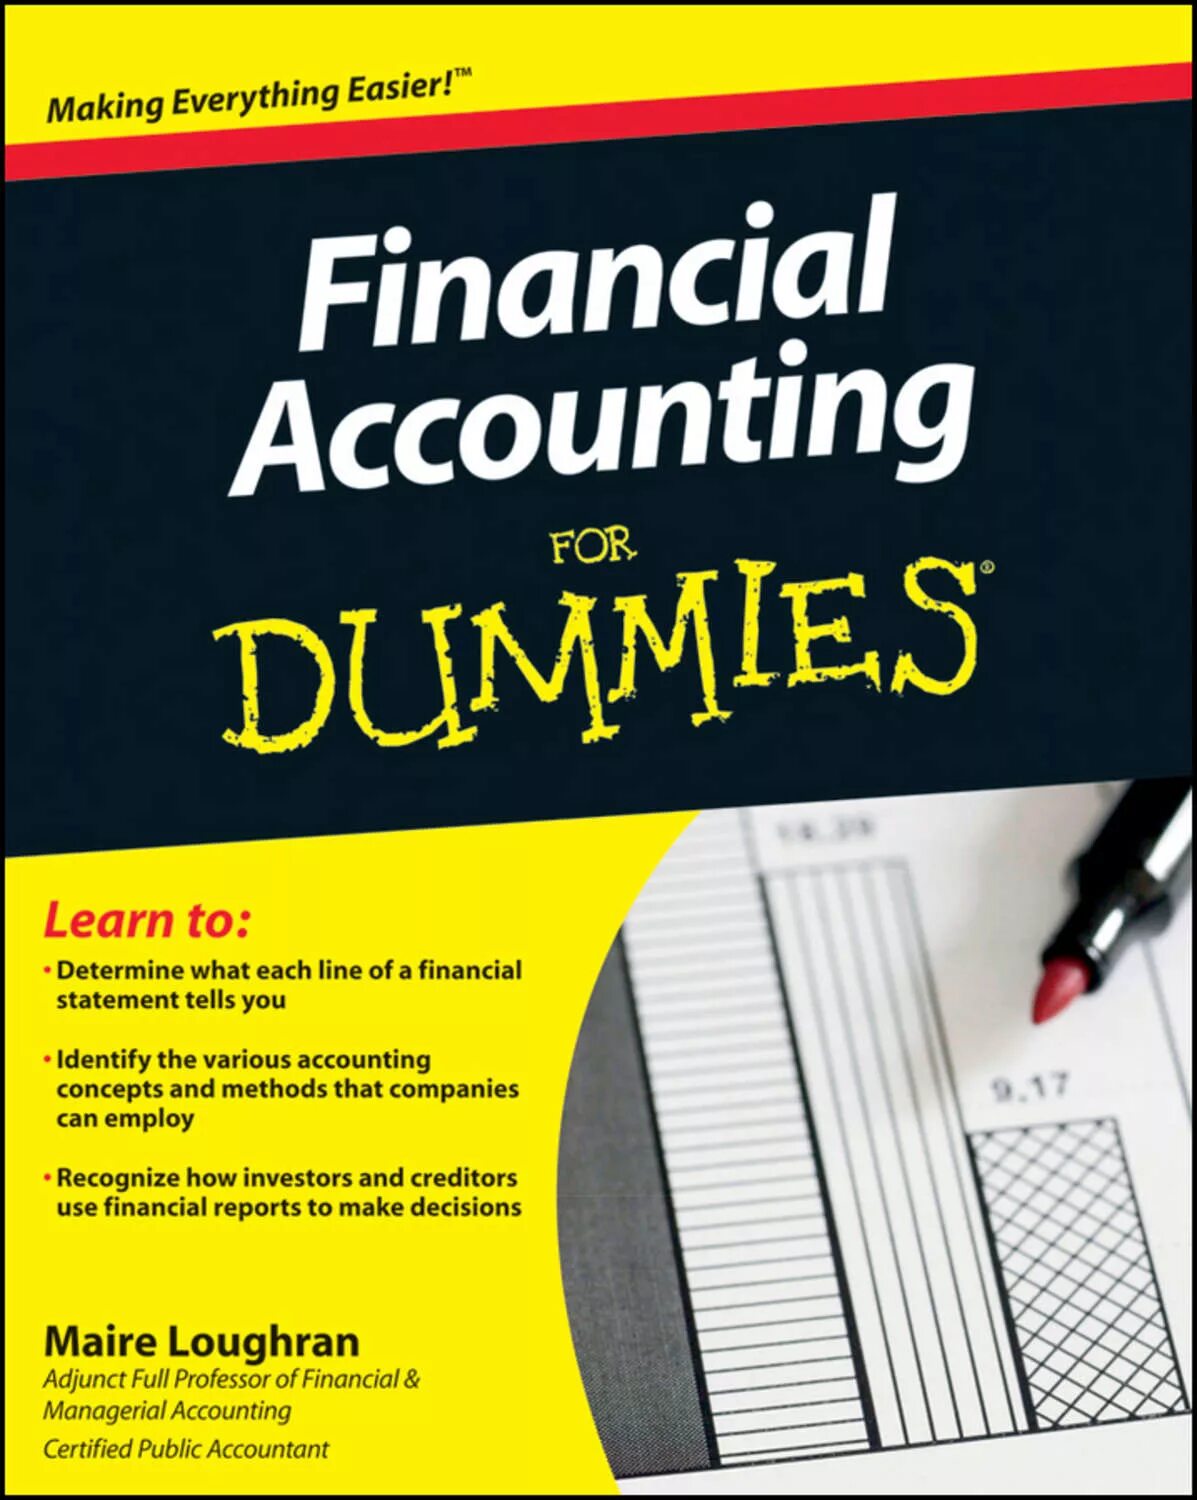 Accounting book. Financial Accounting books. Accounting for Dummies. Books for Accountants. Bookkeeping for Dummies.